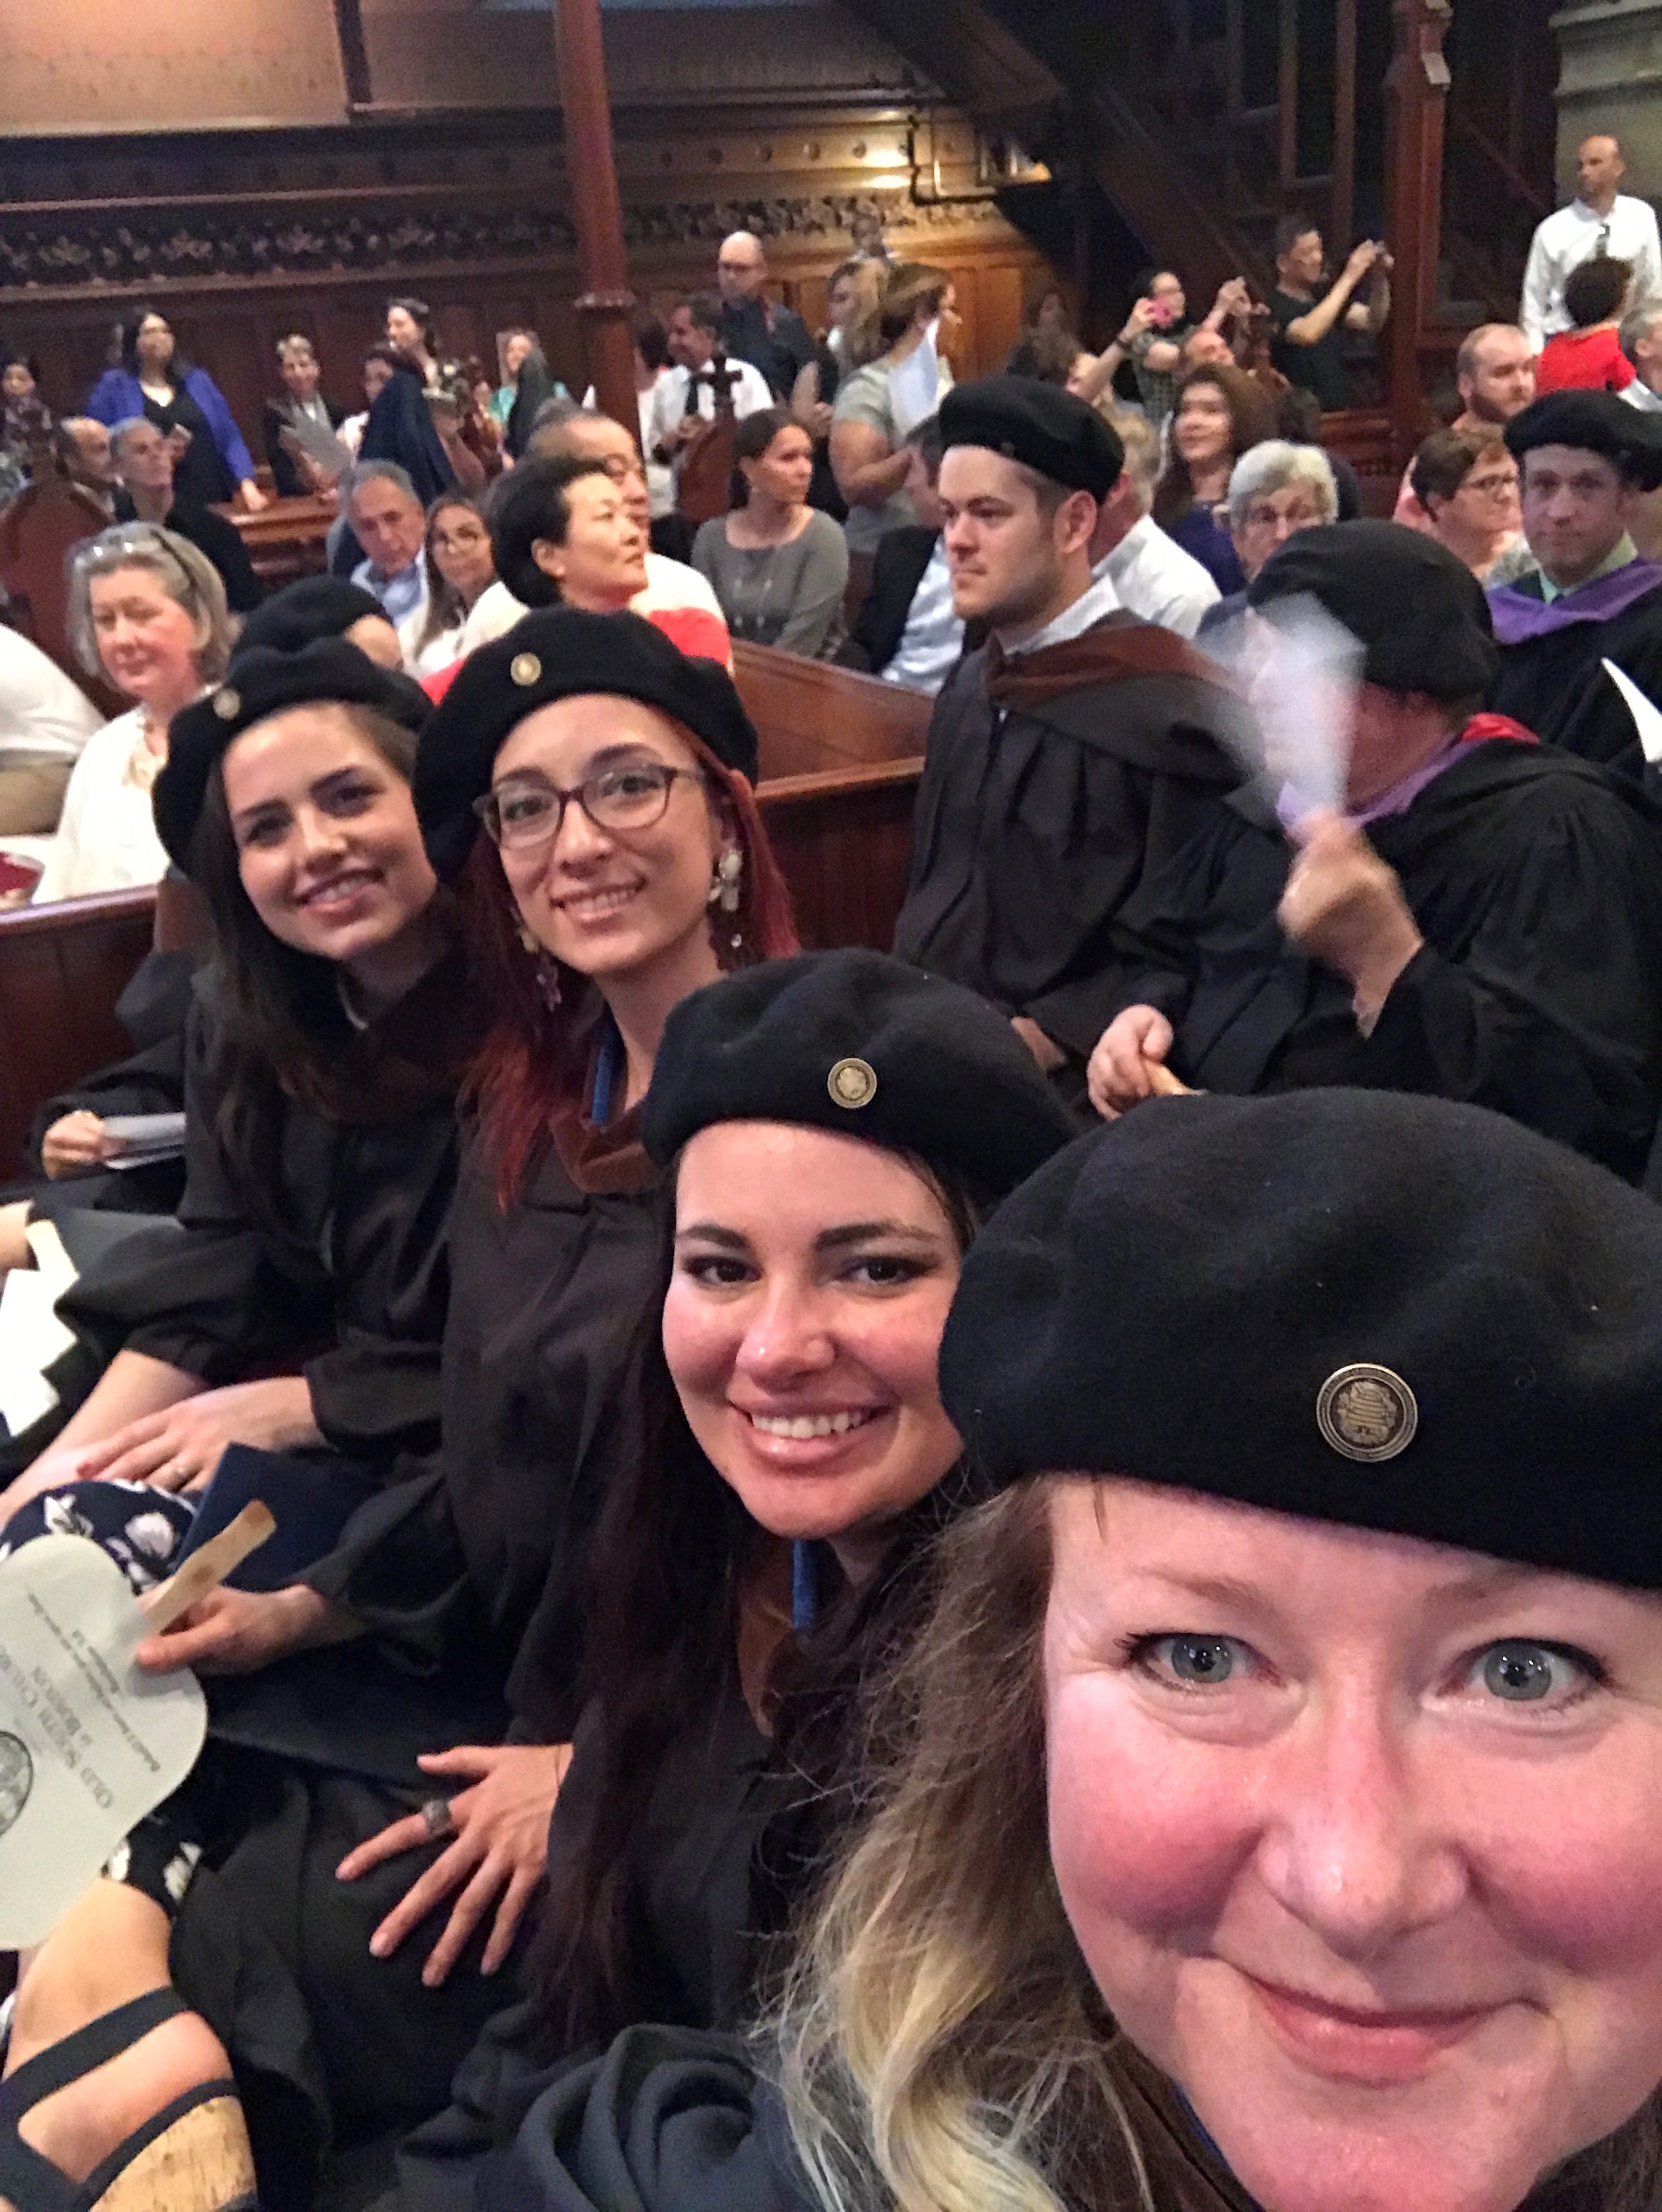 Selfie taken by Janet Roche, MDS-HH'23, during Commencement 2017 in the Old South Church (it was 99 degrees outside). Right to Left, Janet Roche, Chloe Hendricks, Karina Rodriguez-Winkler, and Adrienne (Jones) Erdman - all part of the MDS-HH Class of 2017 (May 19, 2017).